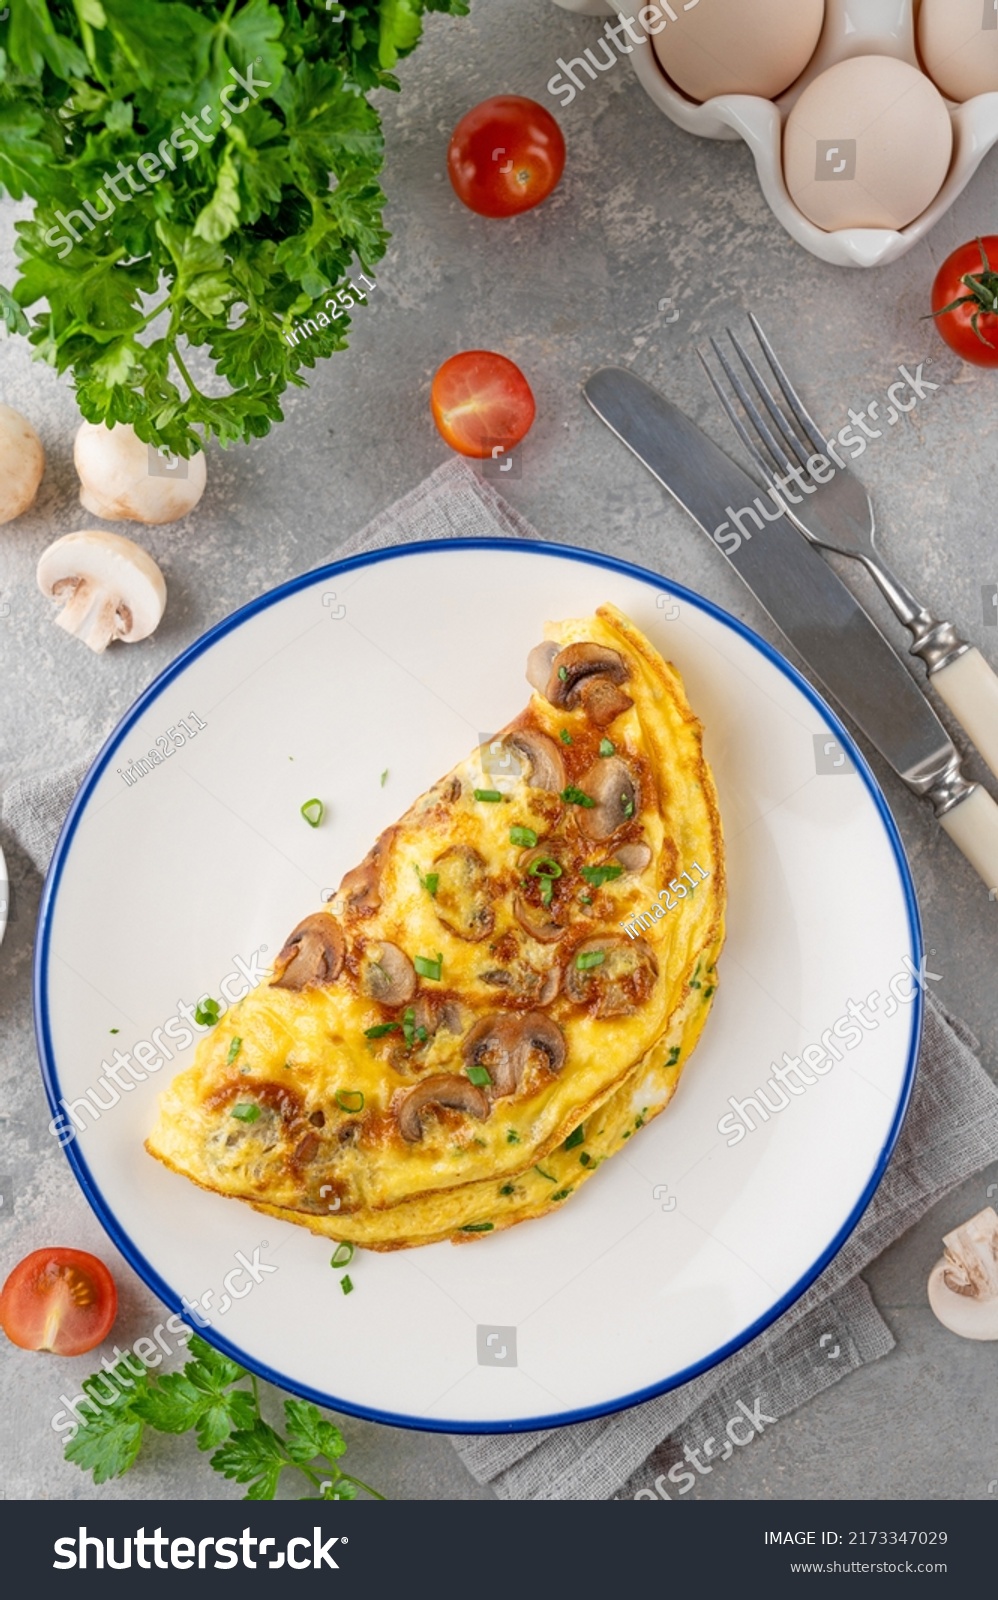 Omelet with fried mushrooms and fresh herbs in a plate on a concrete background. Delicious healthy breakfast. Top view. Copy space #2173347029